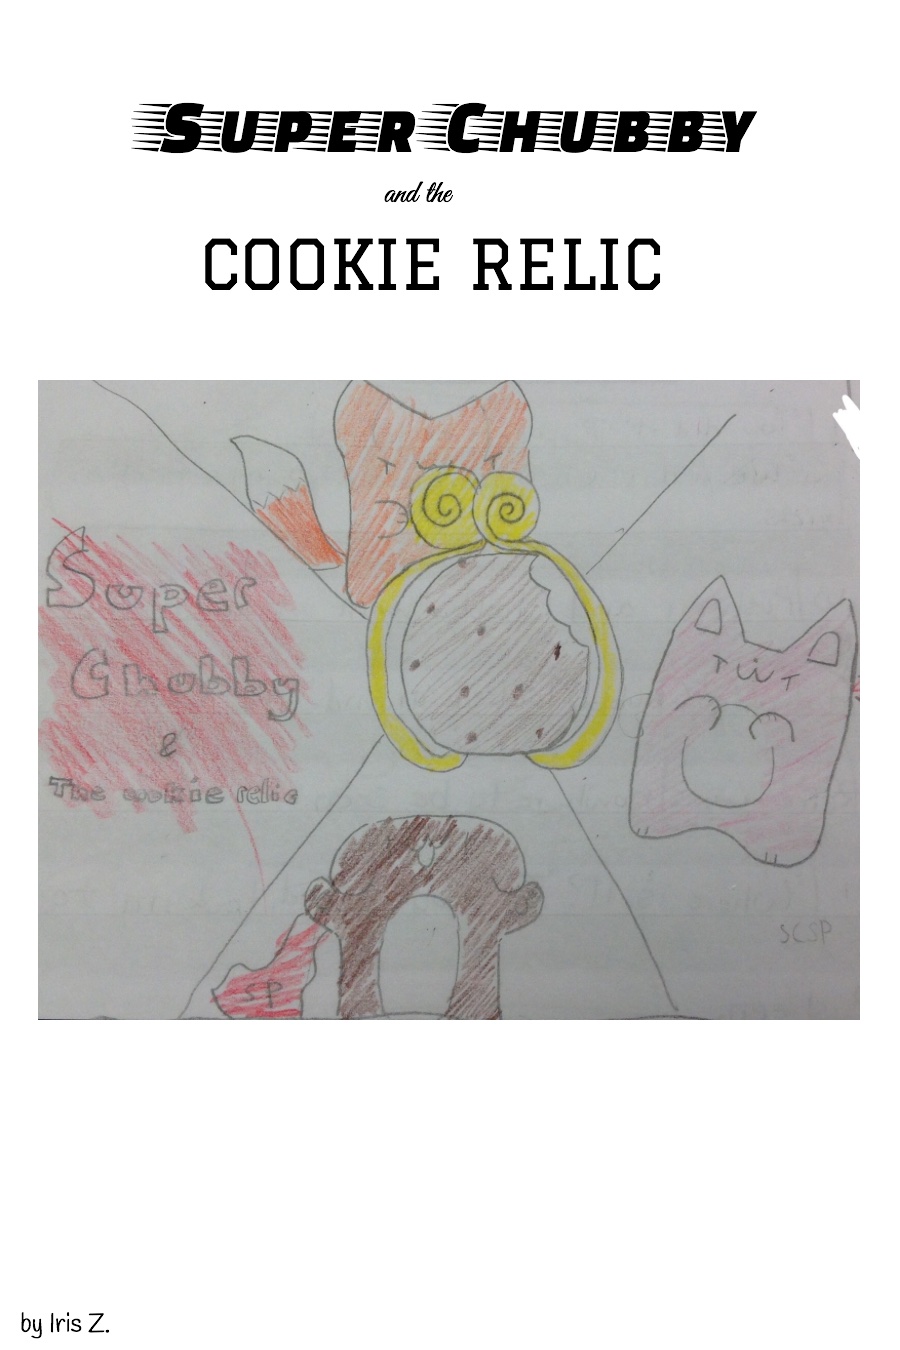 Super Chubby and the Cookie Relic by Iris Z